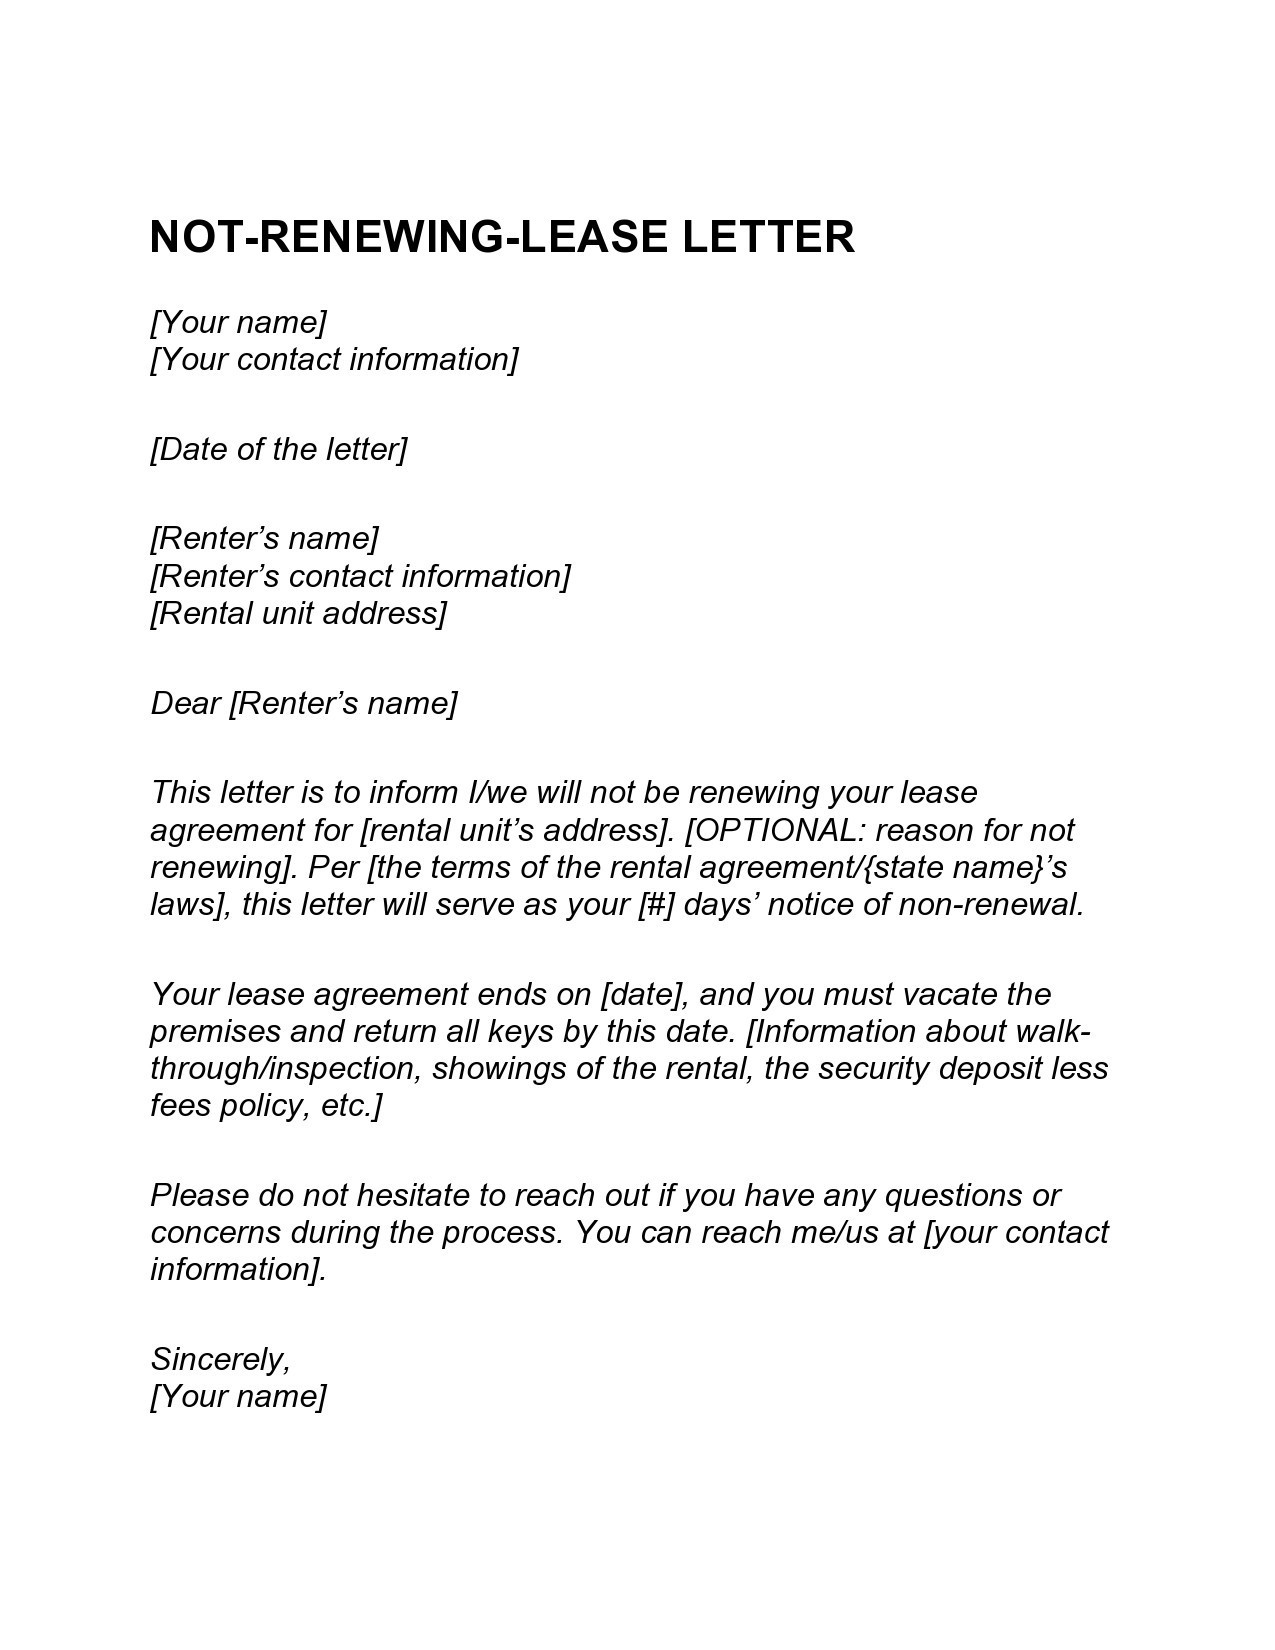 Free not renewing lease letter 16